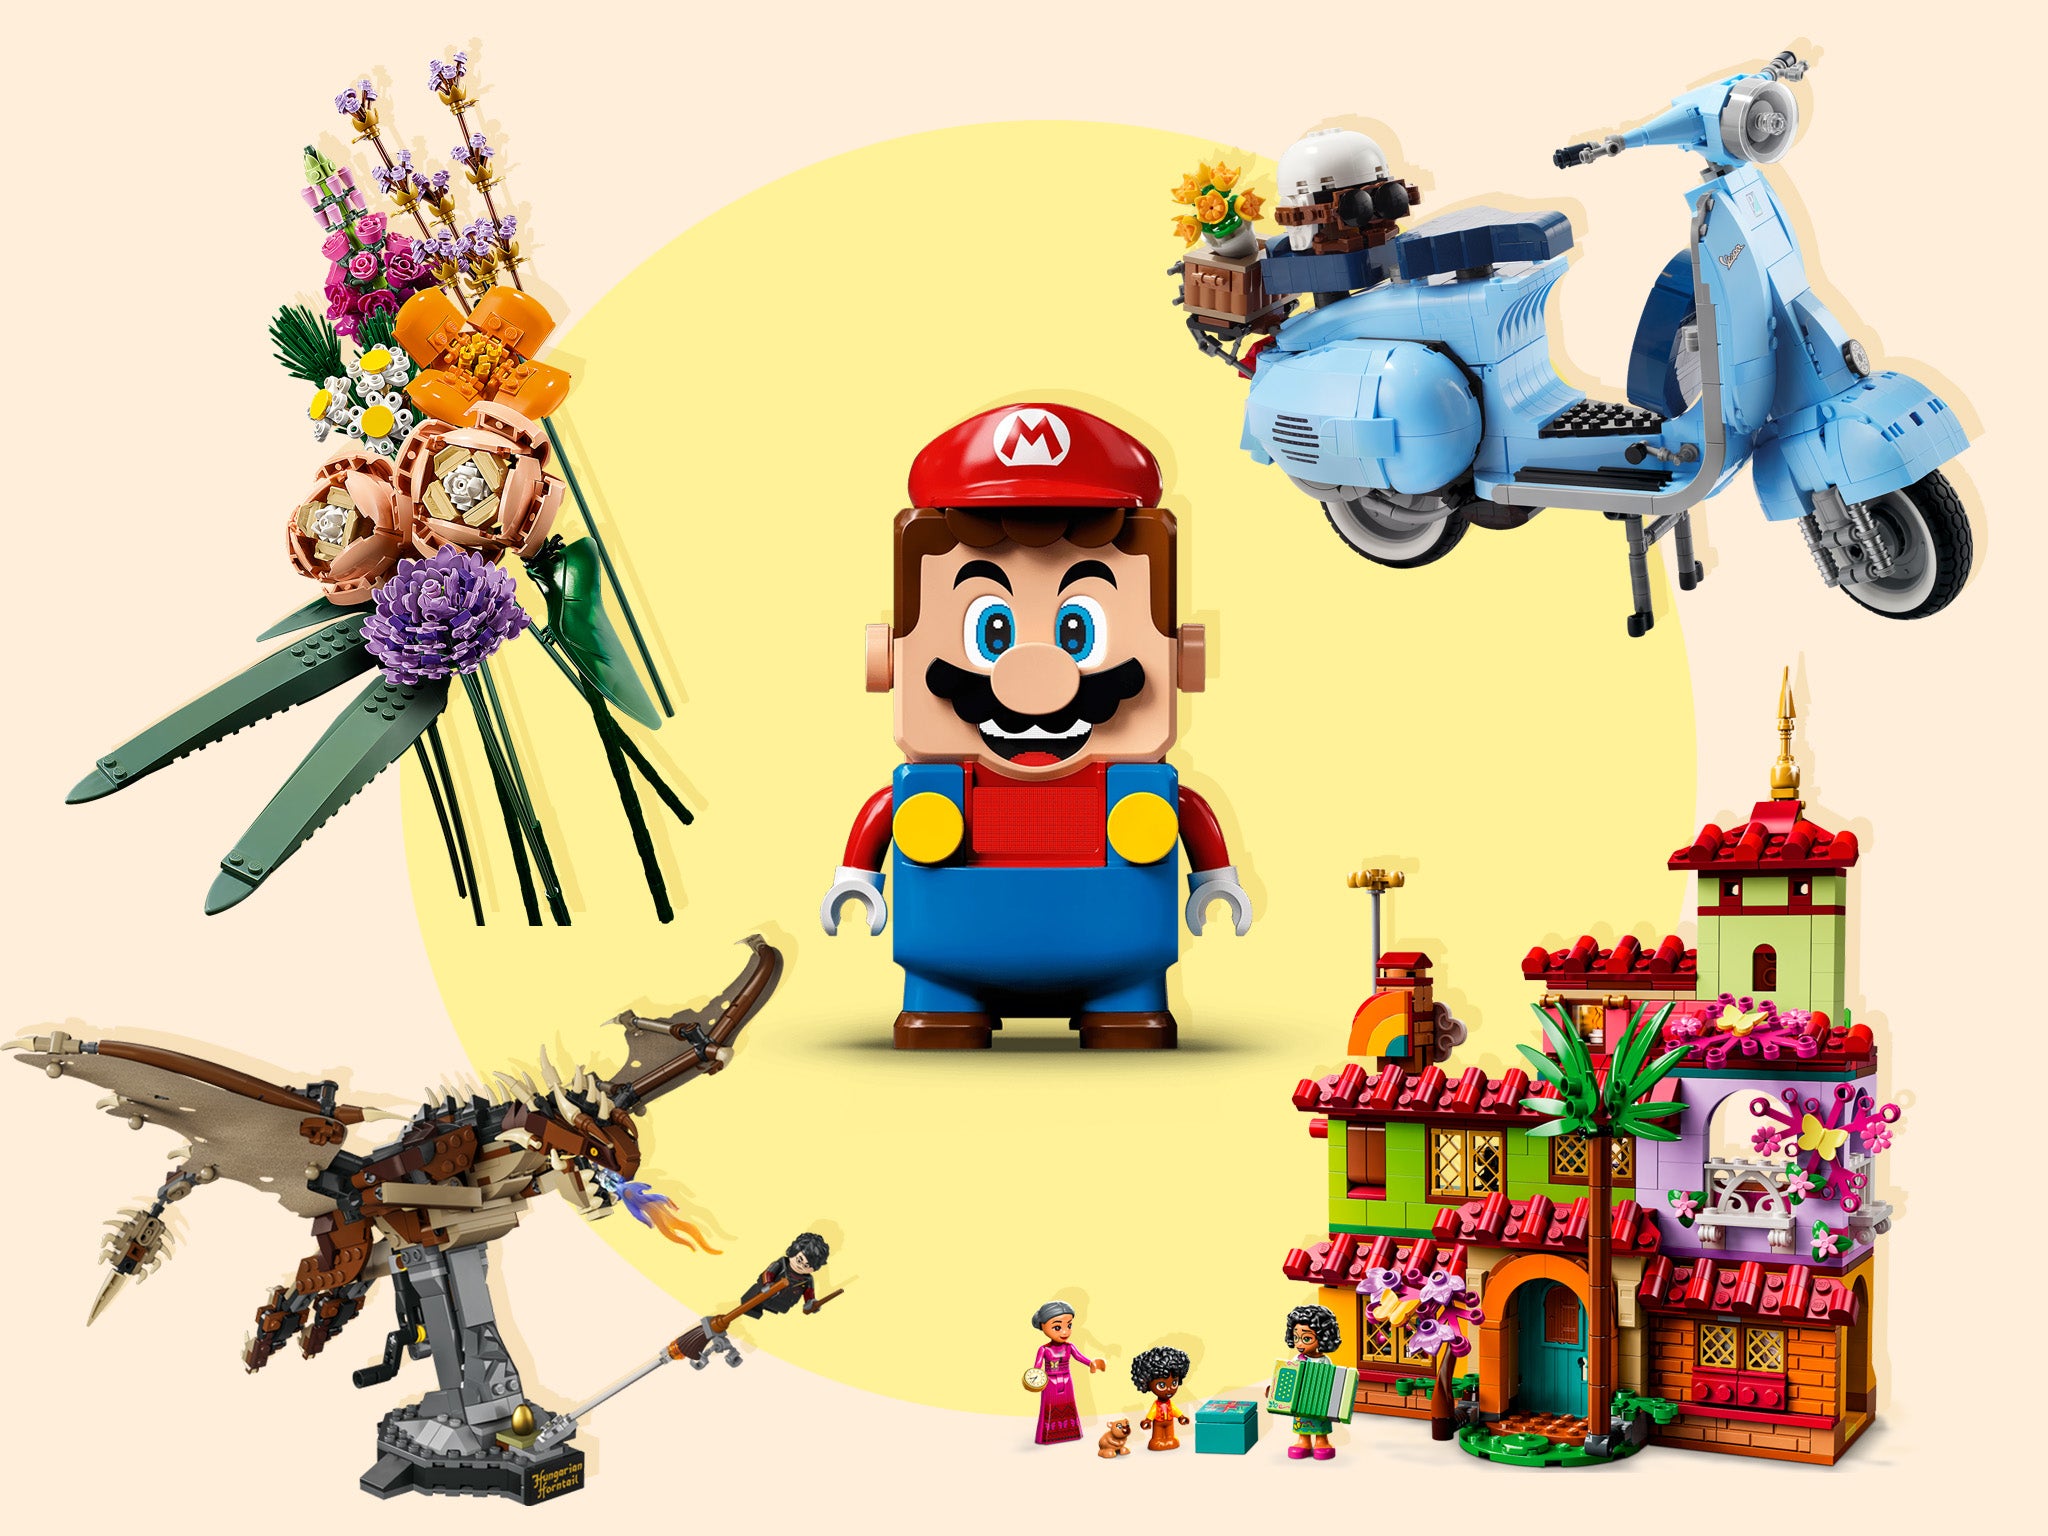 Cyber Monday Lego deals Best sales on Harry Potter, Star Wars & more